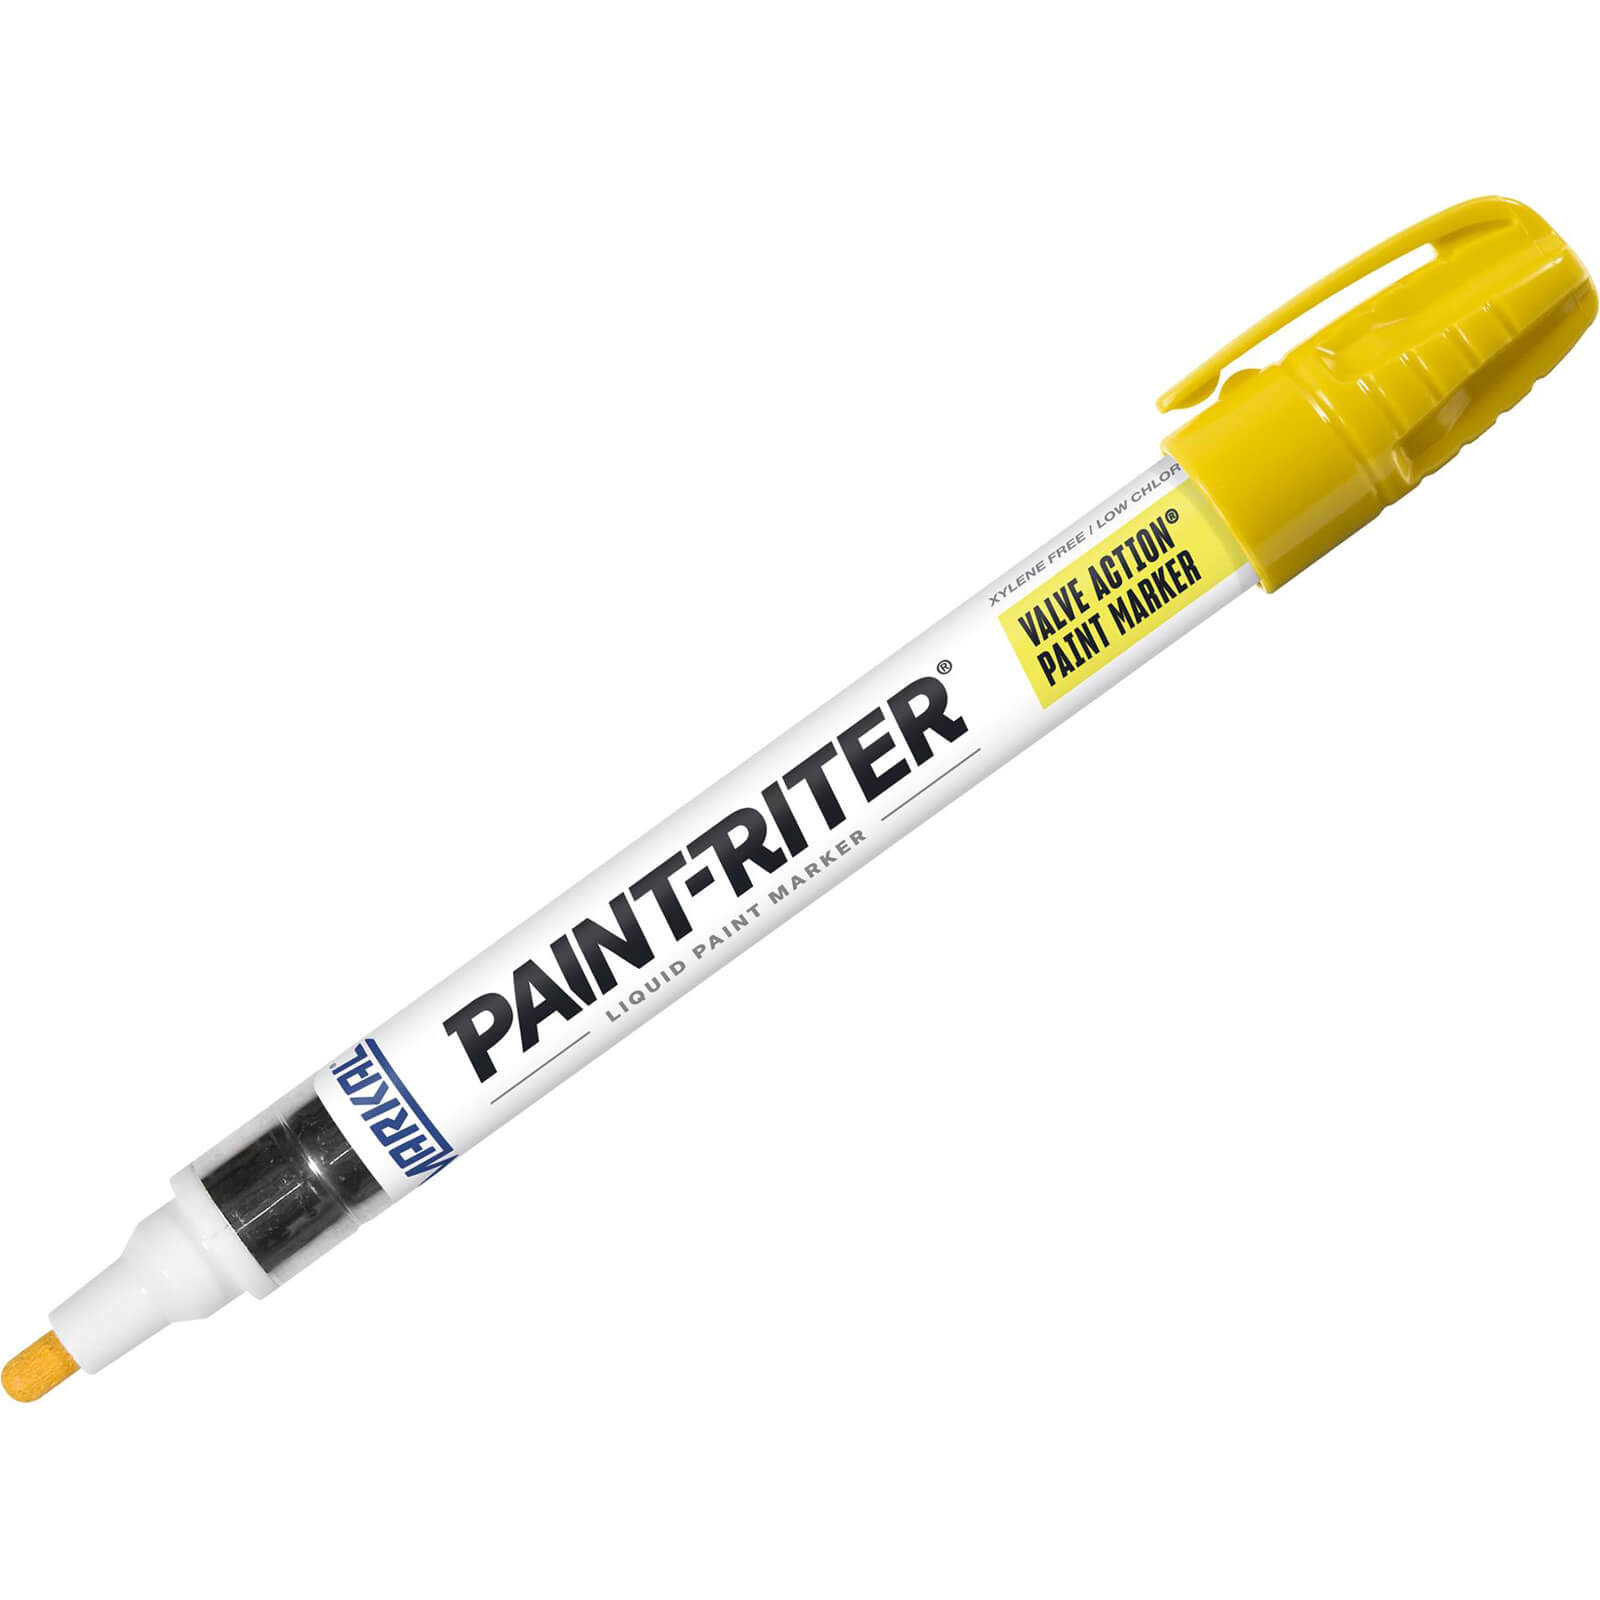 Image of Markal Valve Action Paint Marker Yellow